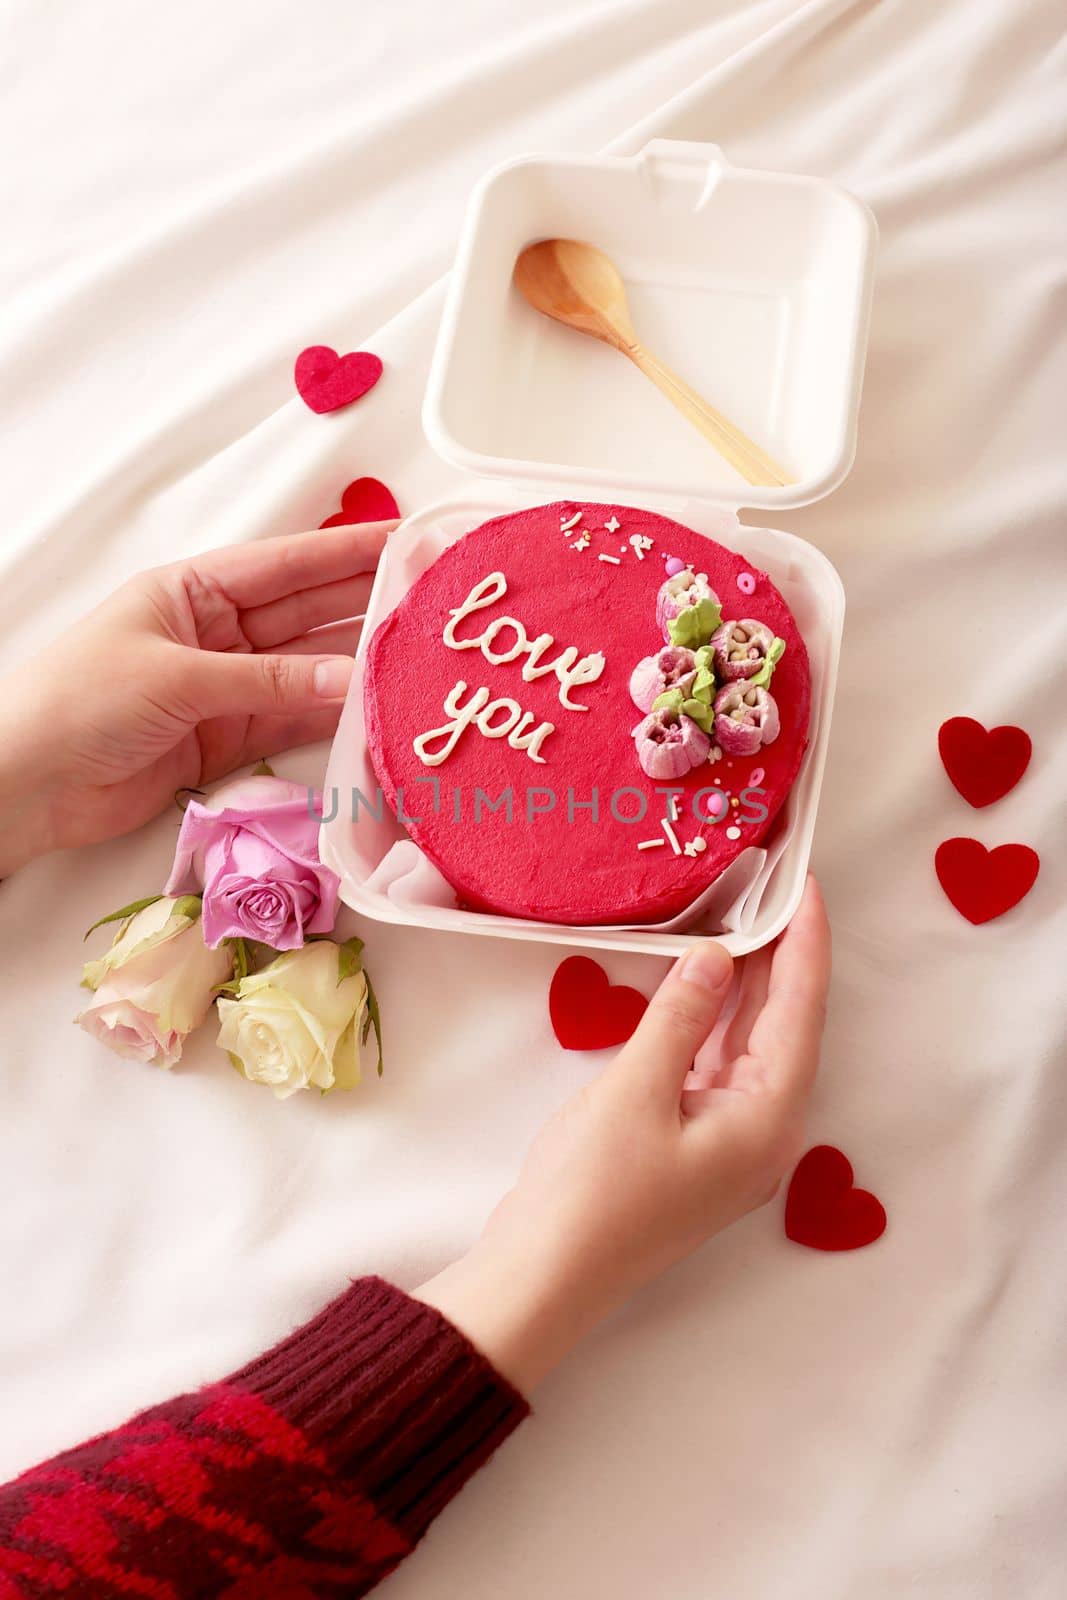 Womens hands are holding a plastic lunch box with a wooden spoon and a delicious red bento cake by Zakharova